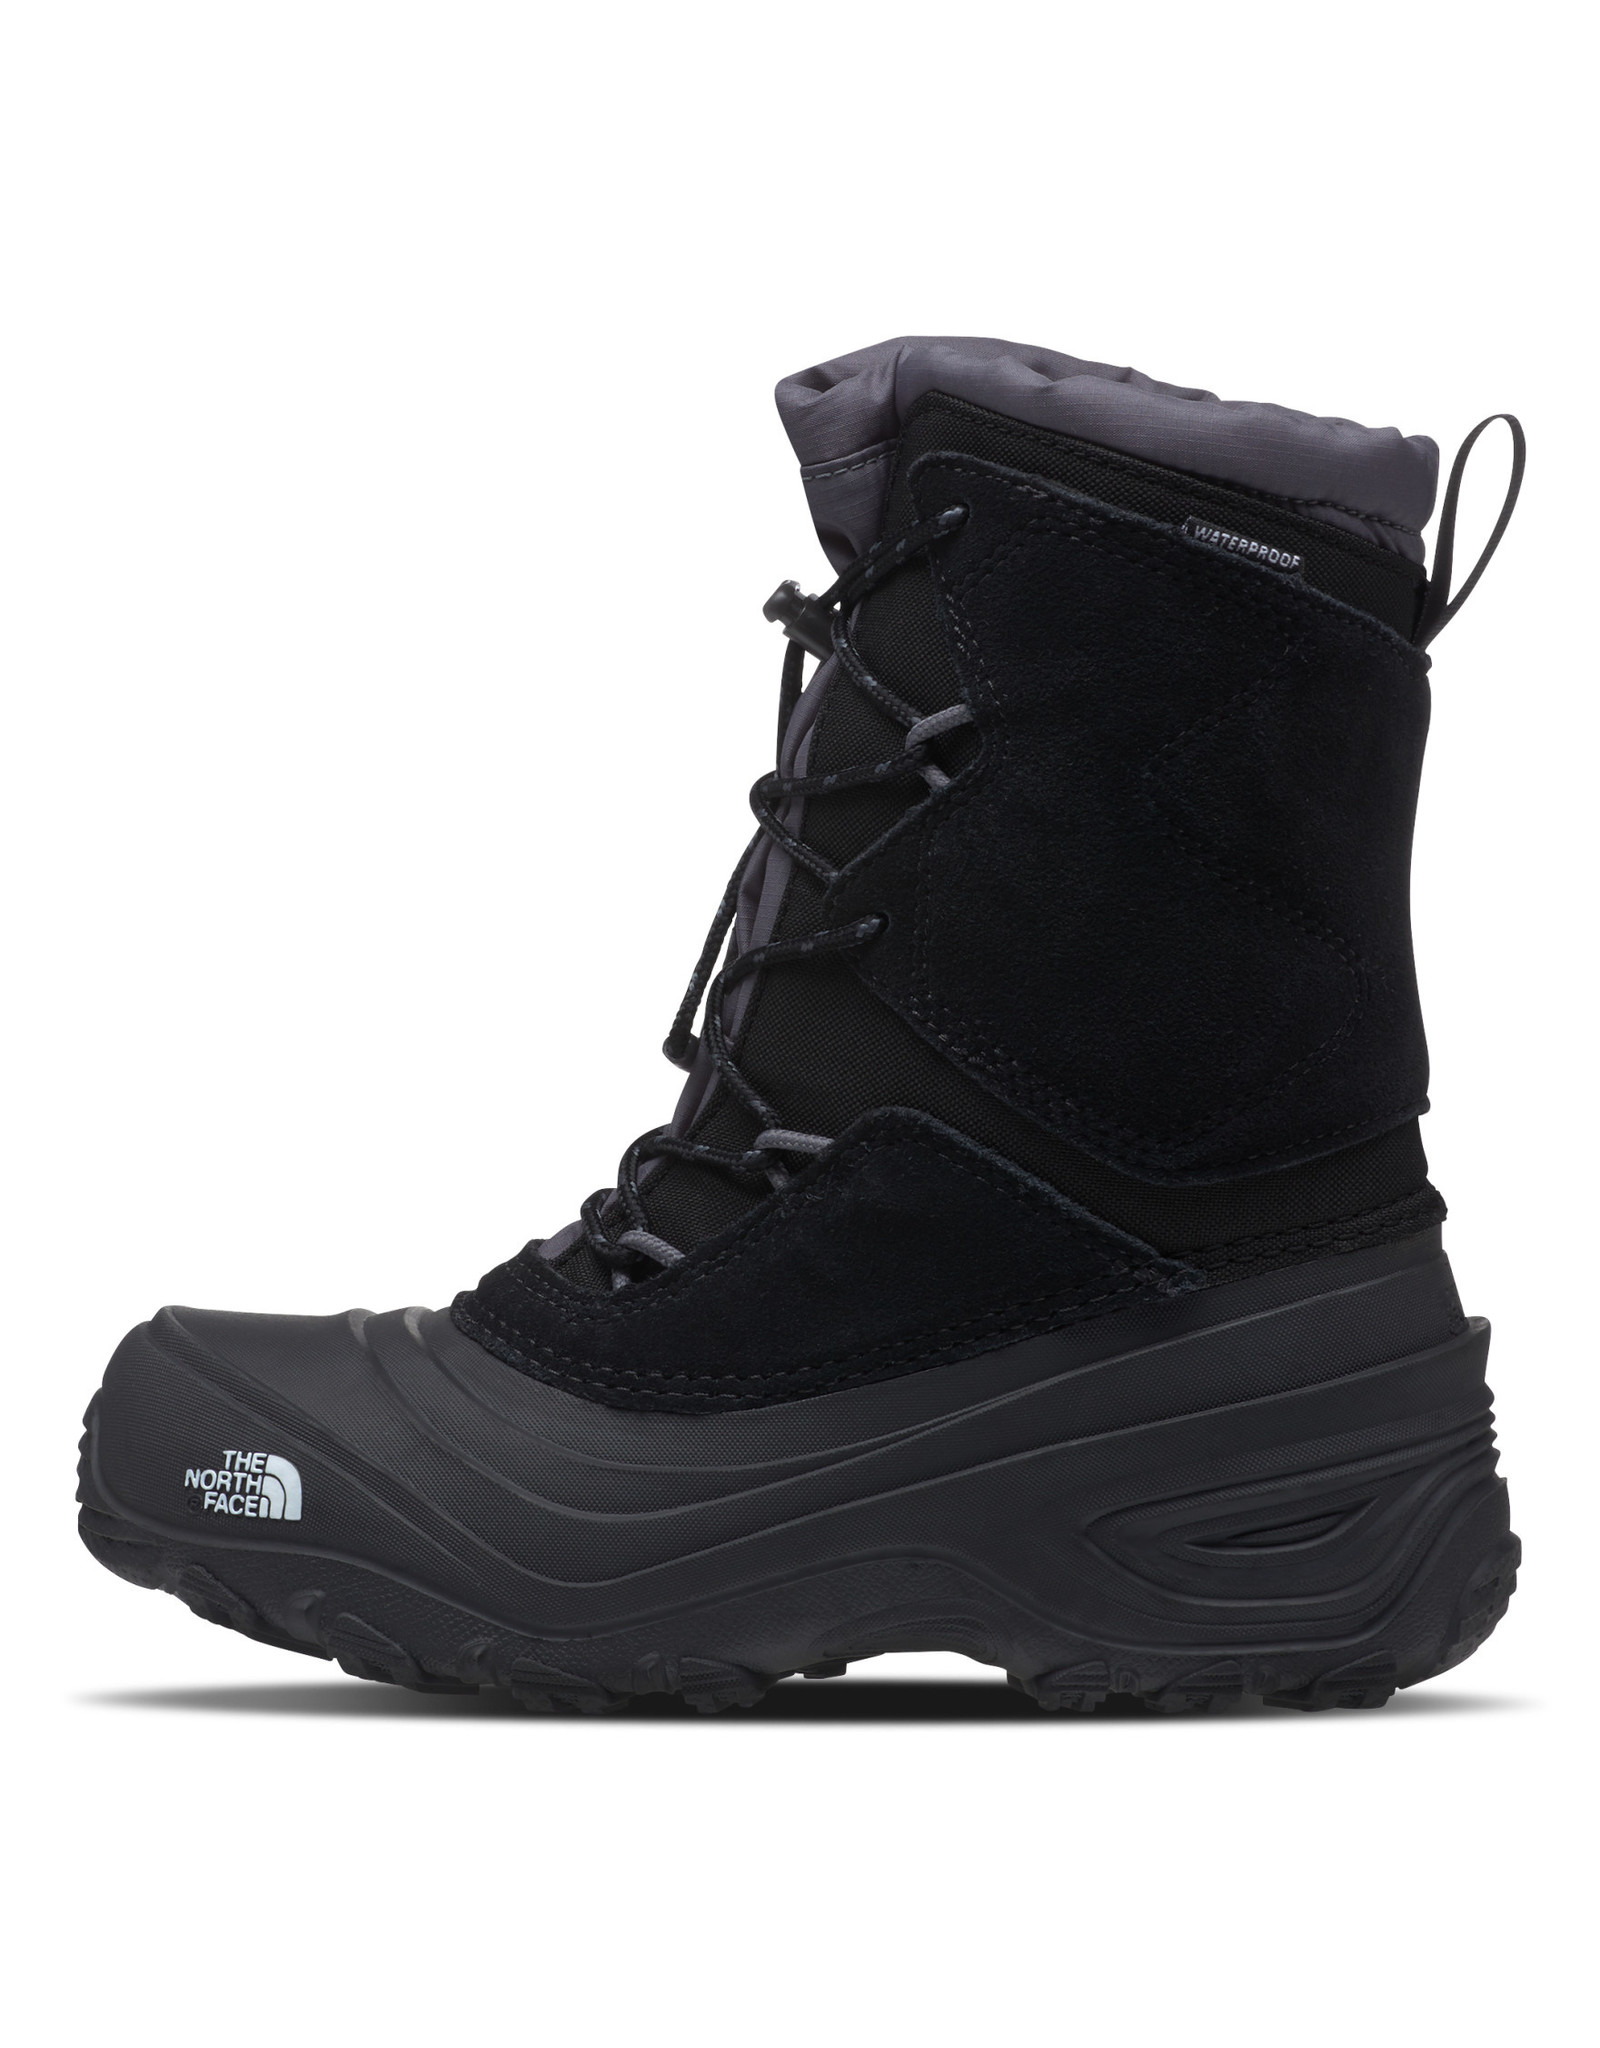 THE NORTH FACE YOUTH ALPENGLOW V WP BOOT